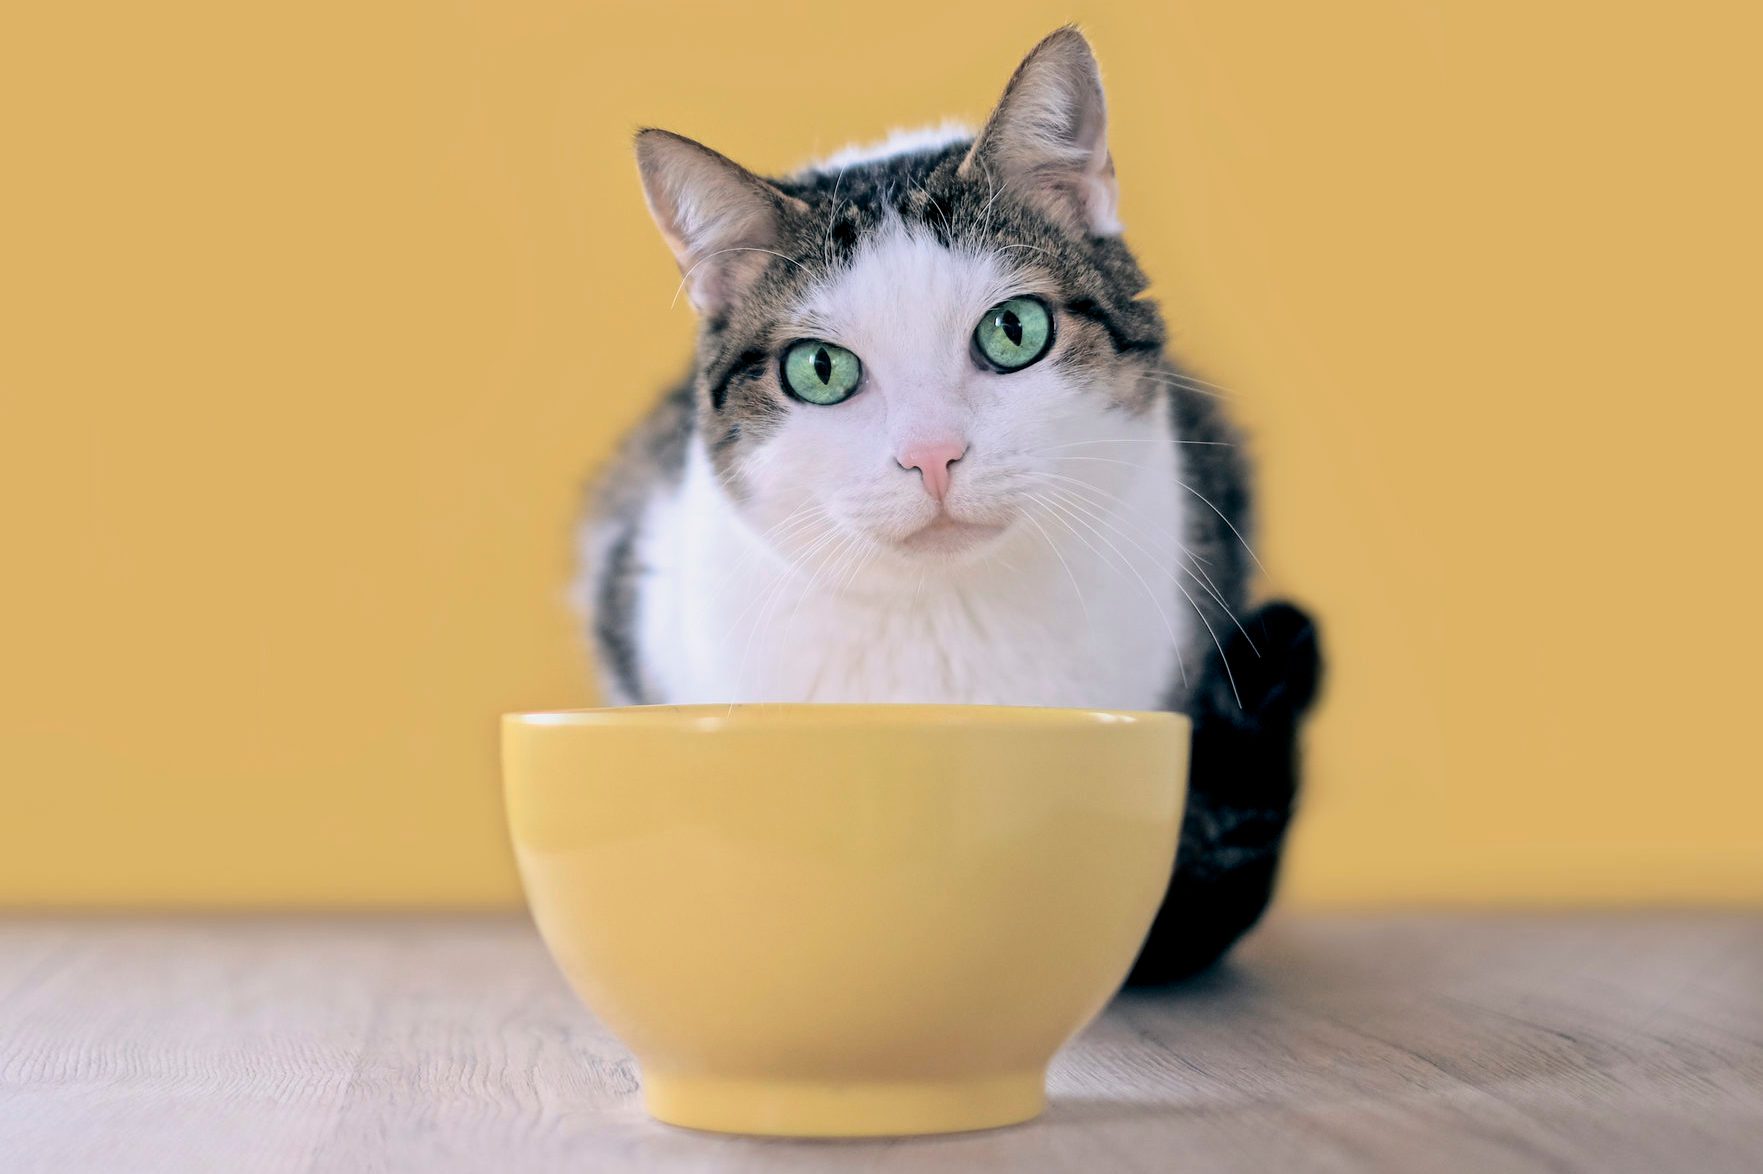 Why Is My Cat Not Eating? Reader's Digest